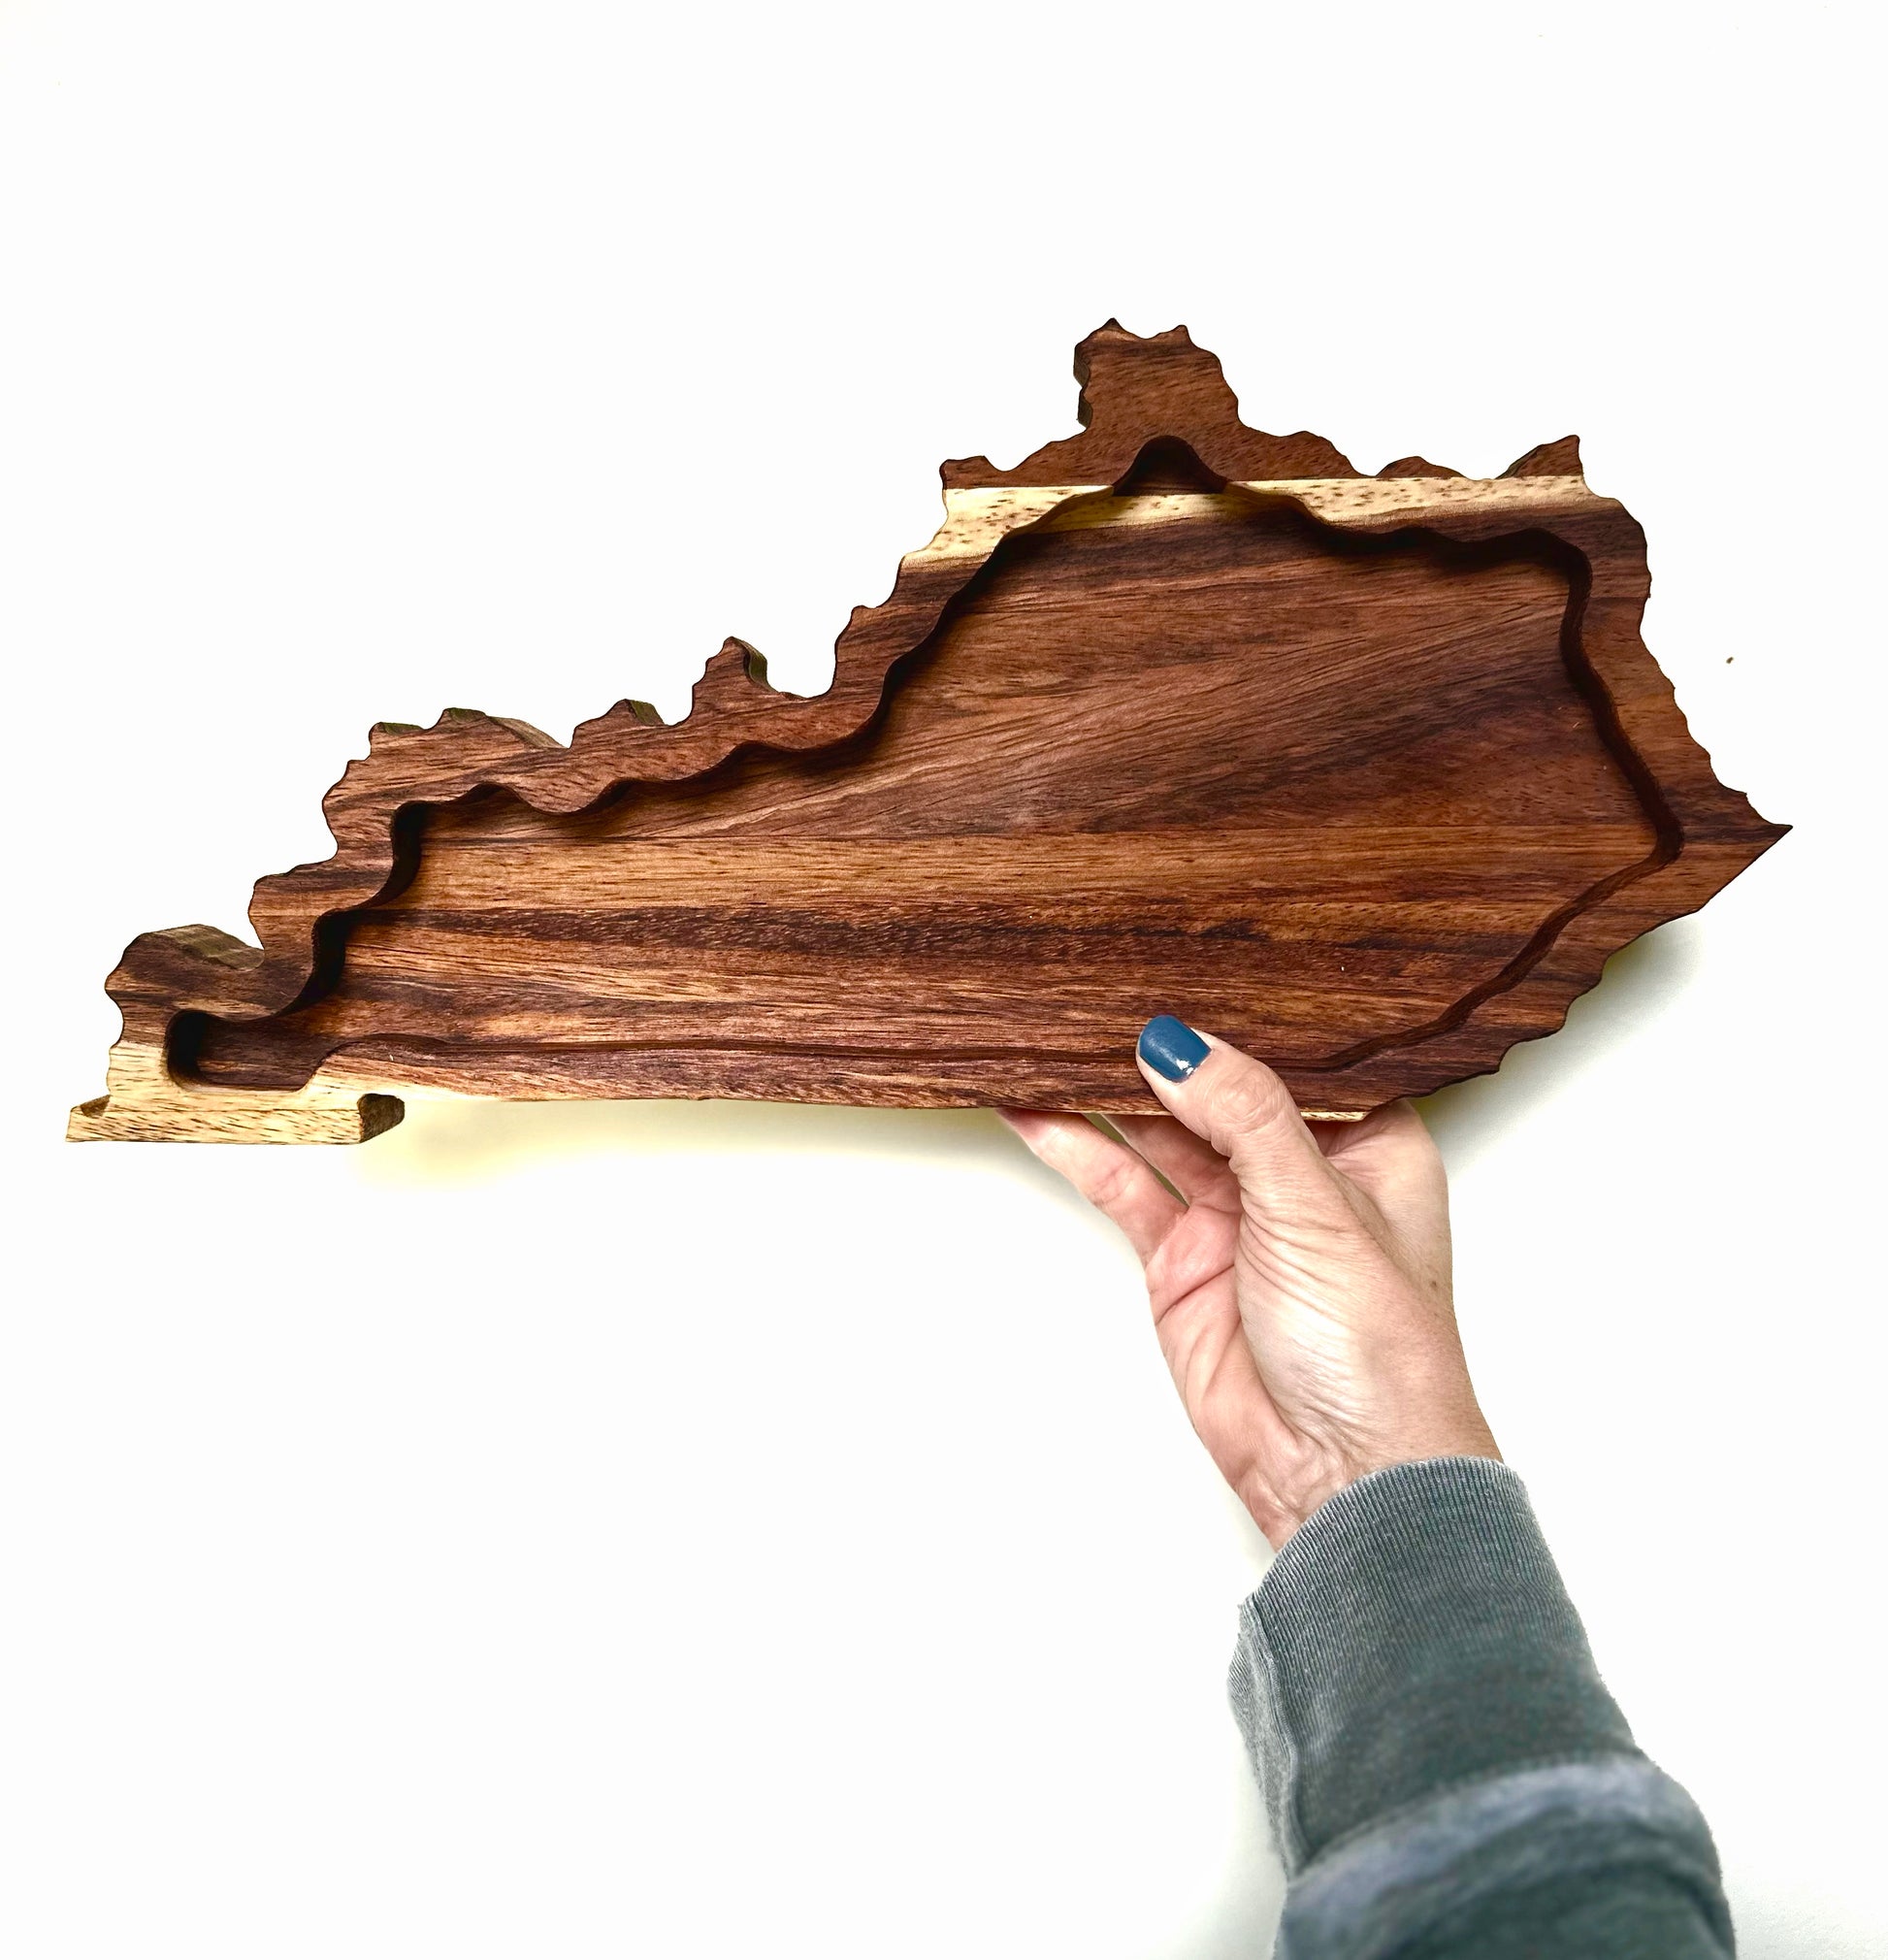 Kentucky shaped charcuterie board that can be used as a centerpiece decor